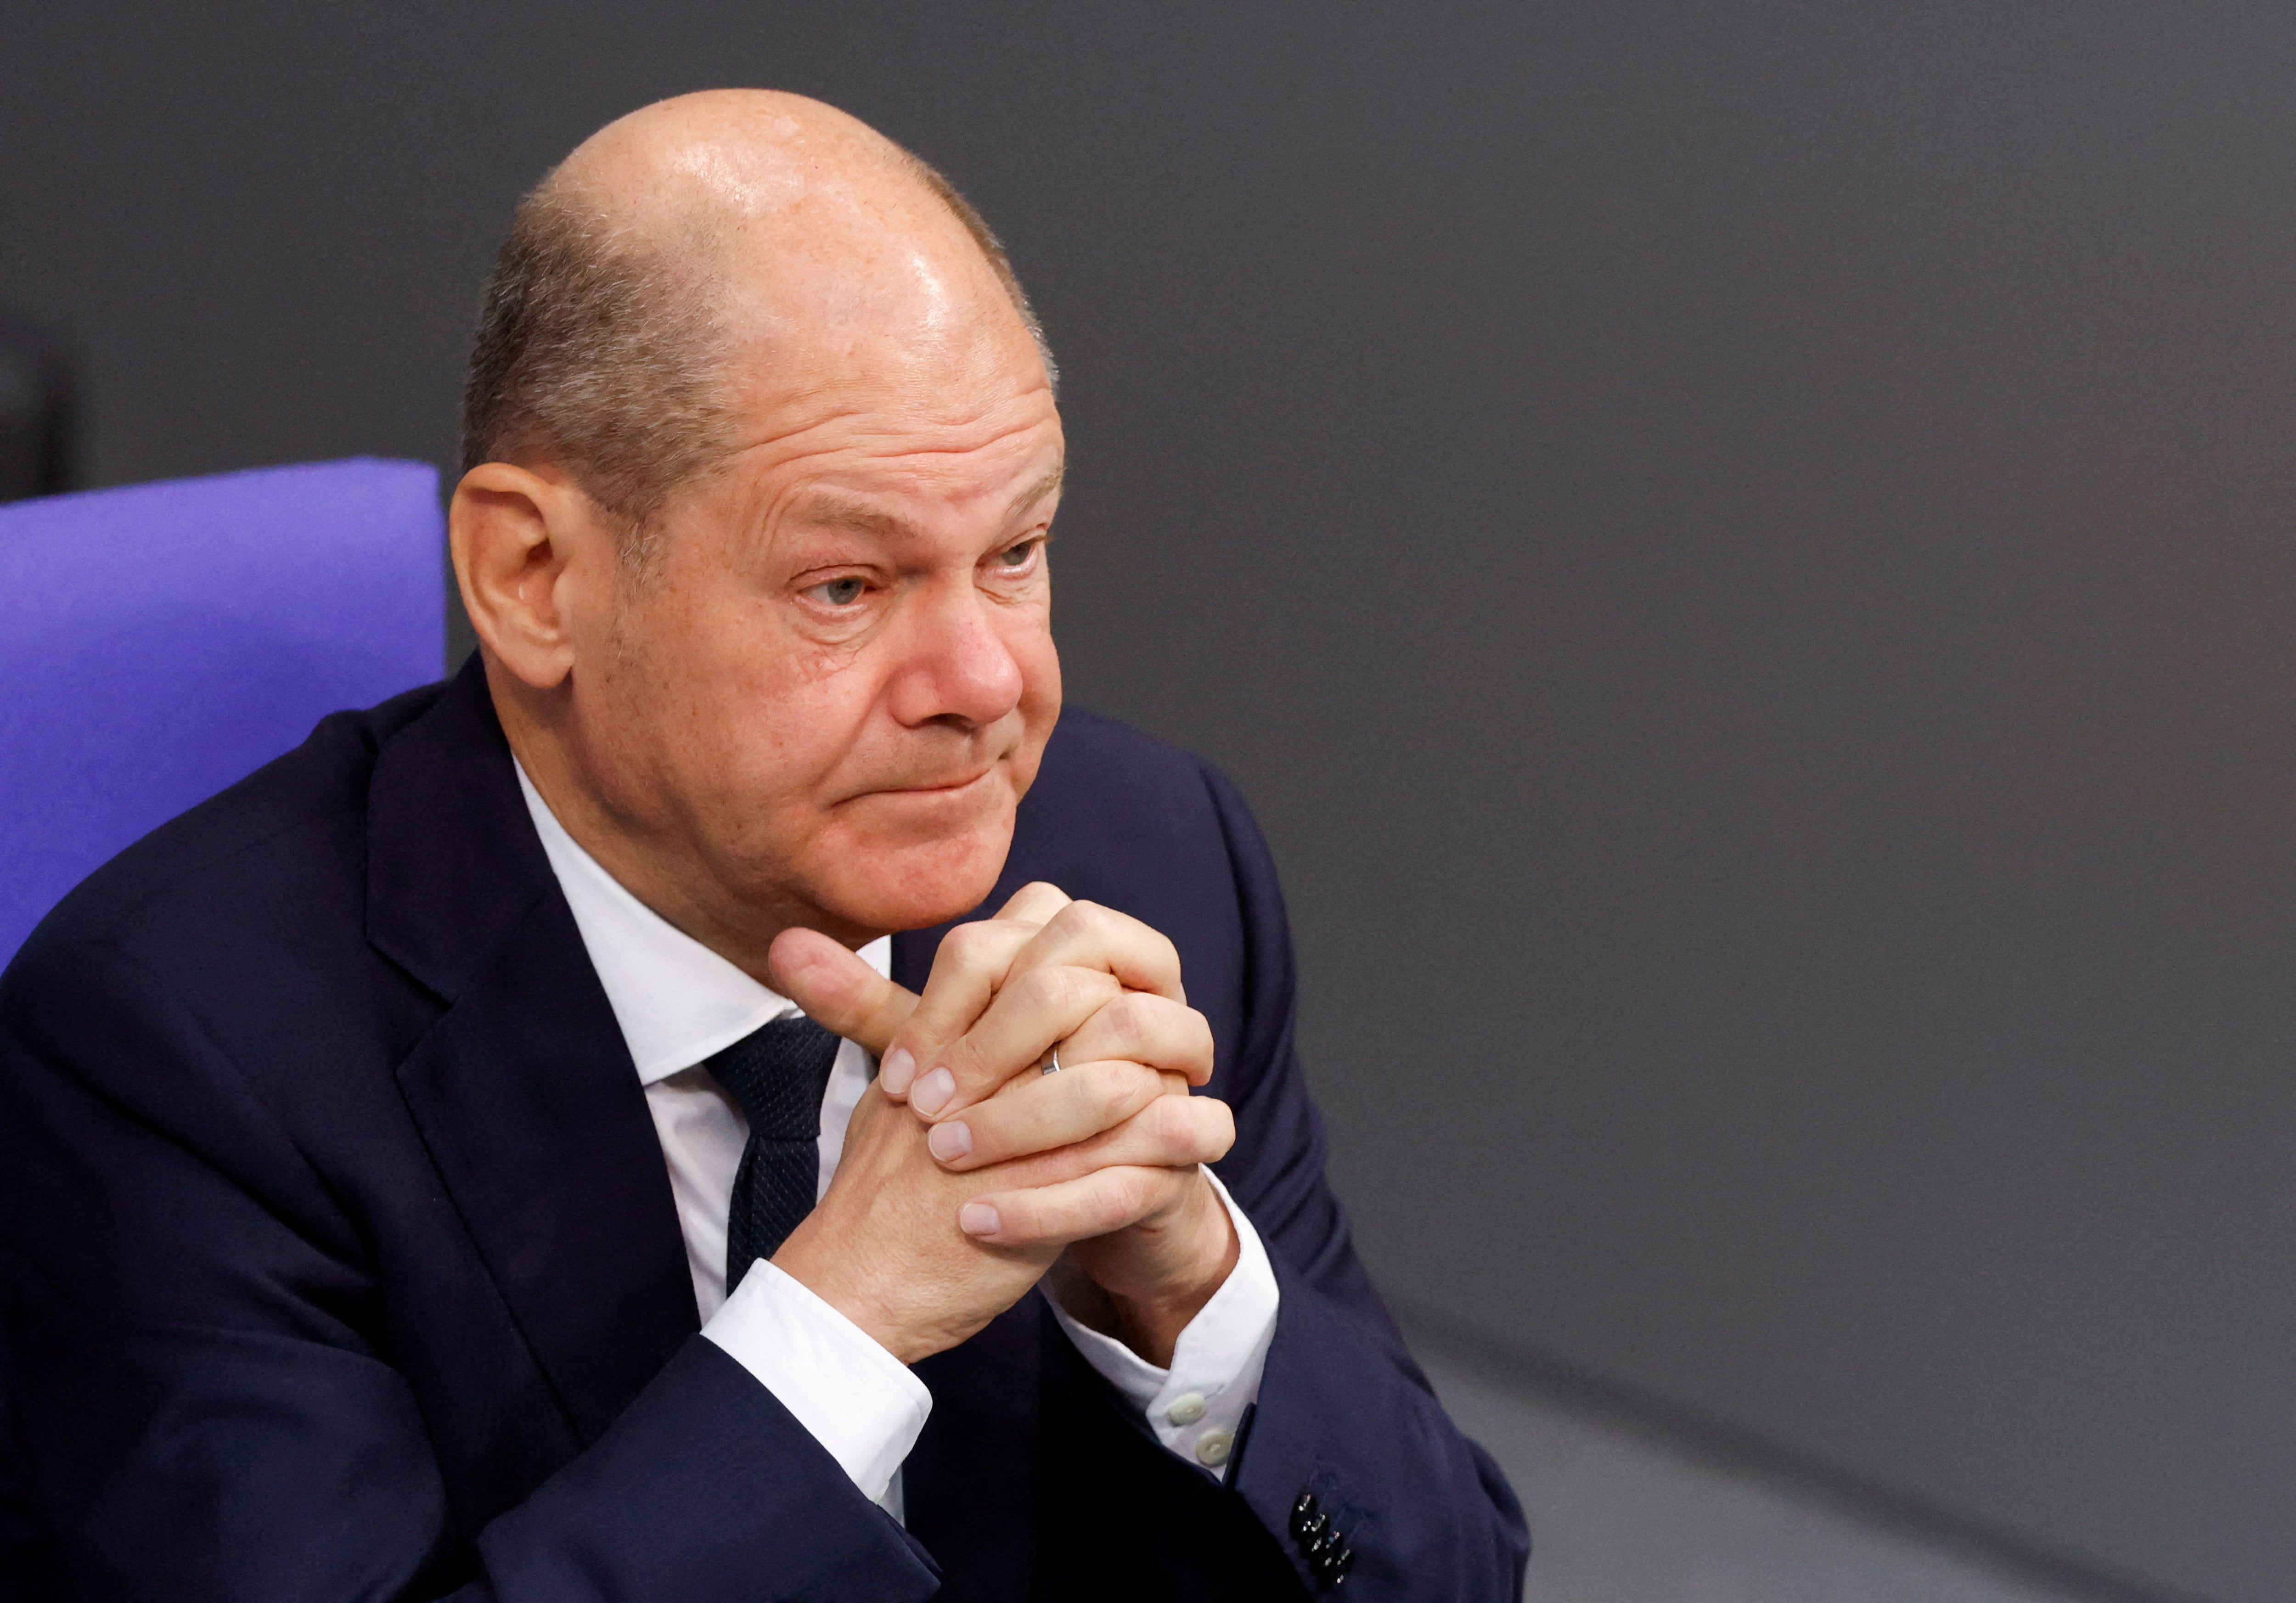 German Chancellor Olaf Scholz attends the budget debate in the plenary hall of the German lower house of parliament, or Bundestag, in Berlin, Germany November 22, 2022. REUTERS/Michele Tantussi